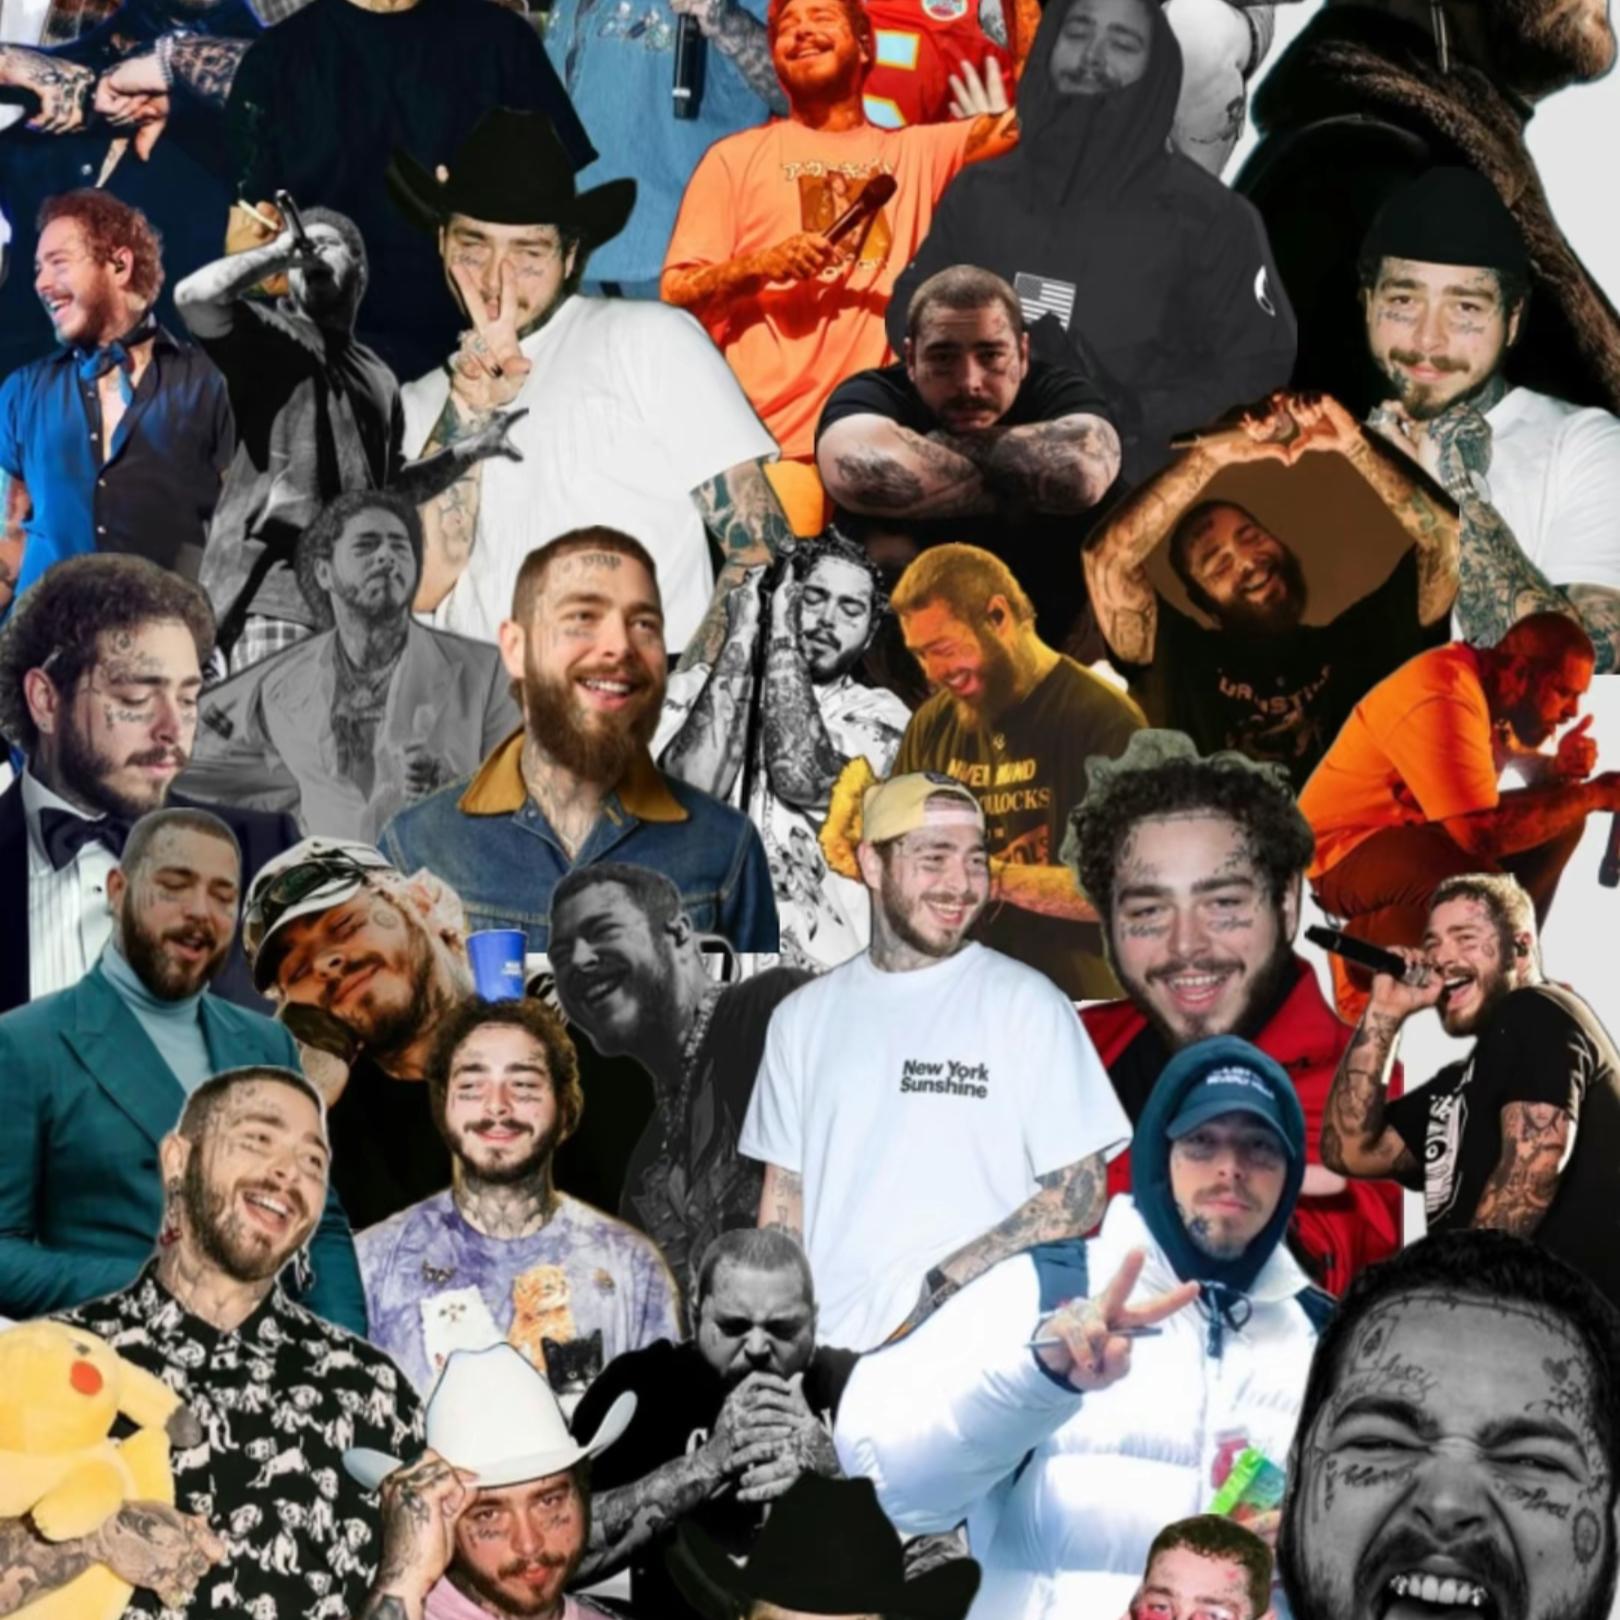 Post Malone's images